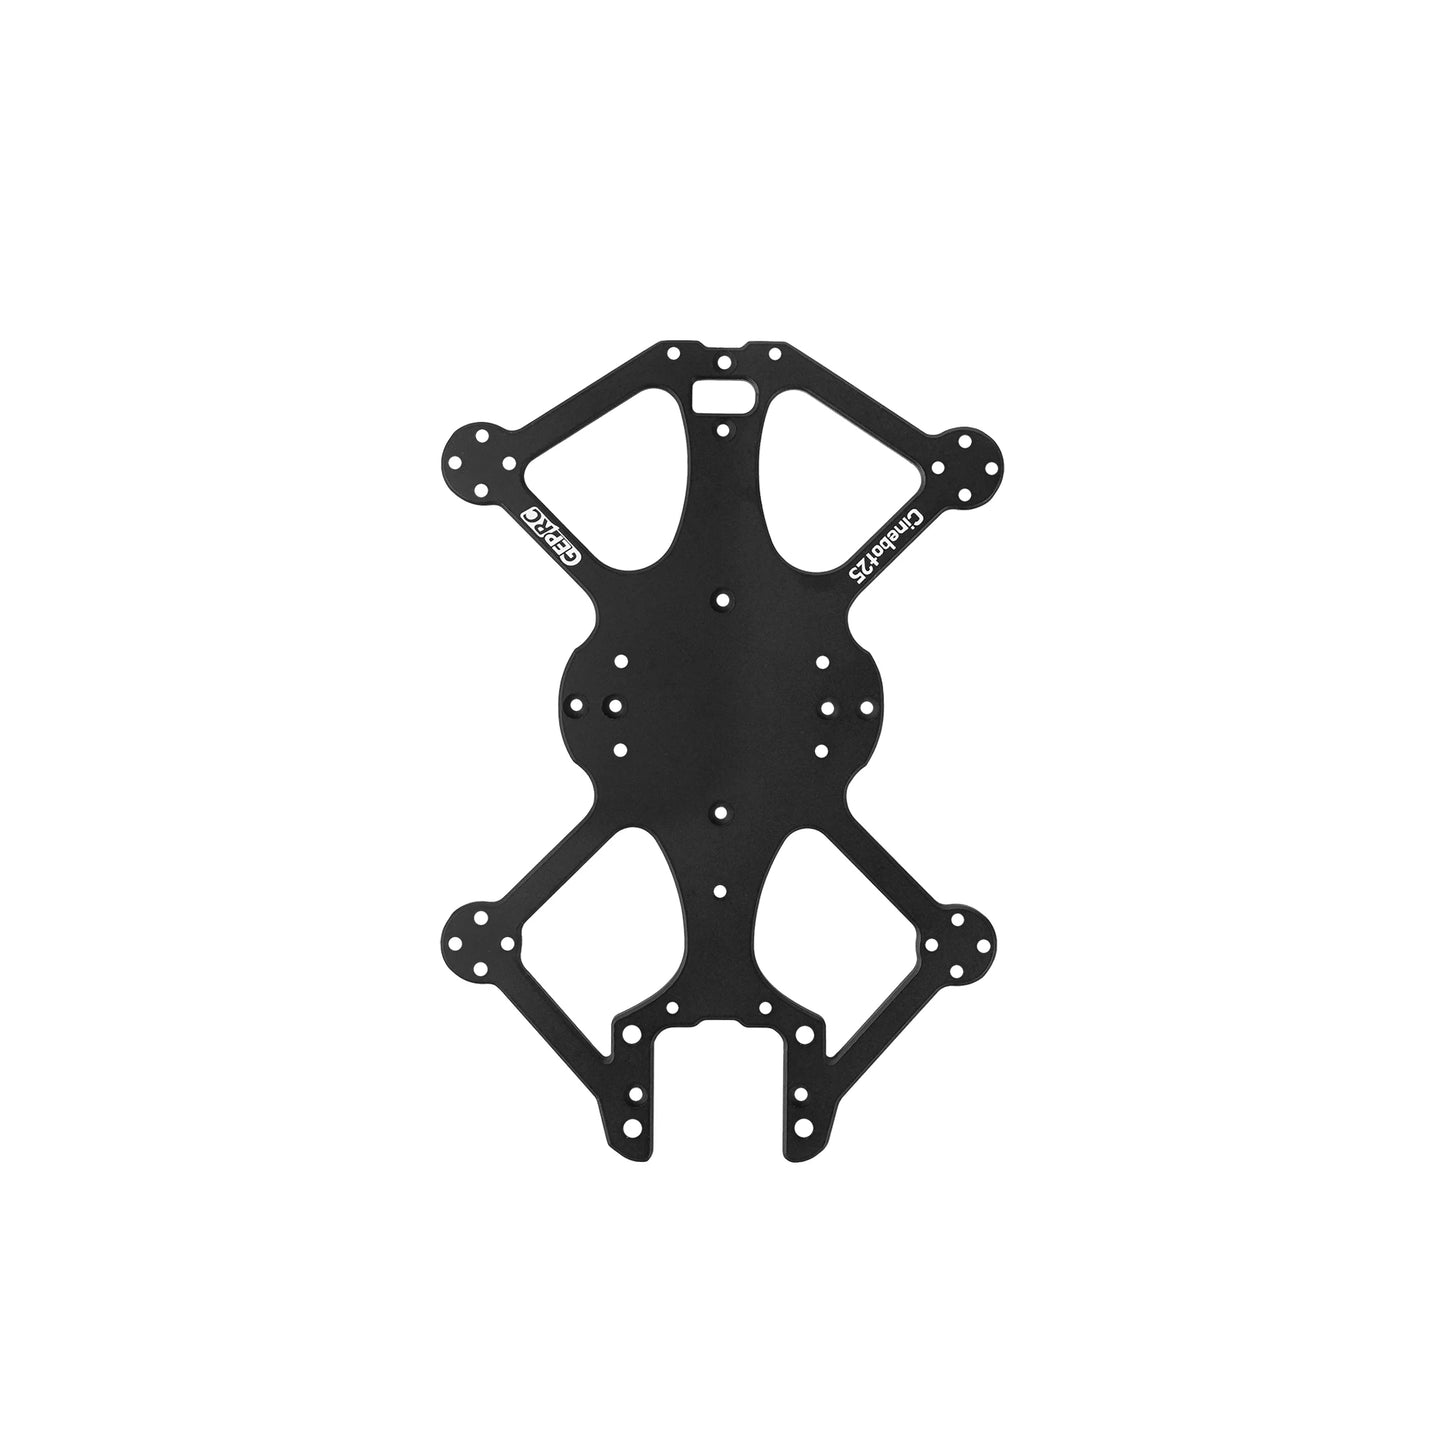 GEPRC GEP-CT25 Frame Parts - Suitable Cinebot25 Drone Replacement Repair Part RC DIY FPV Freestyle Rack Accessories Spare Parts